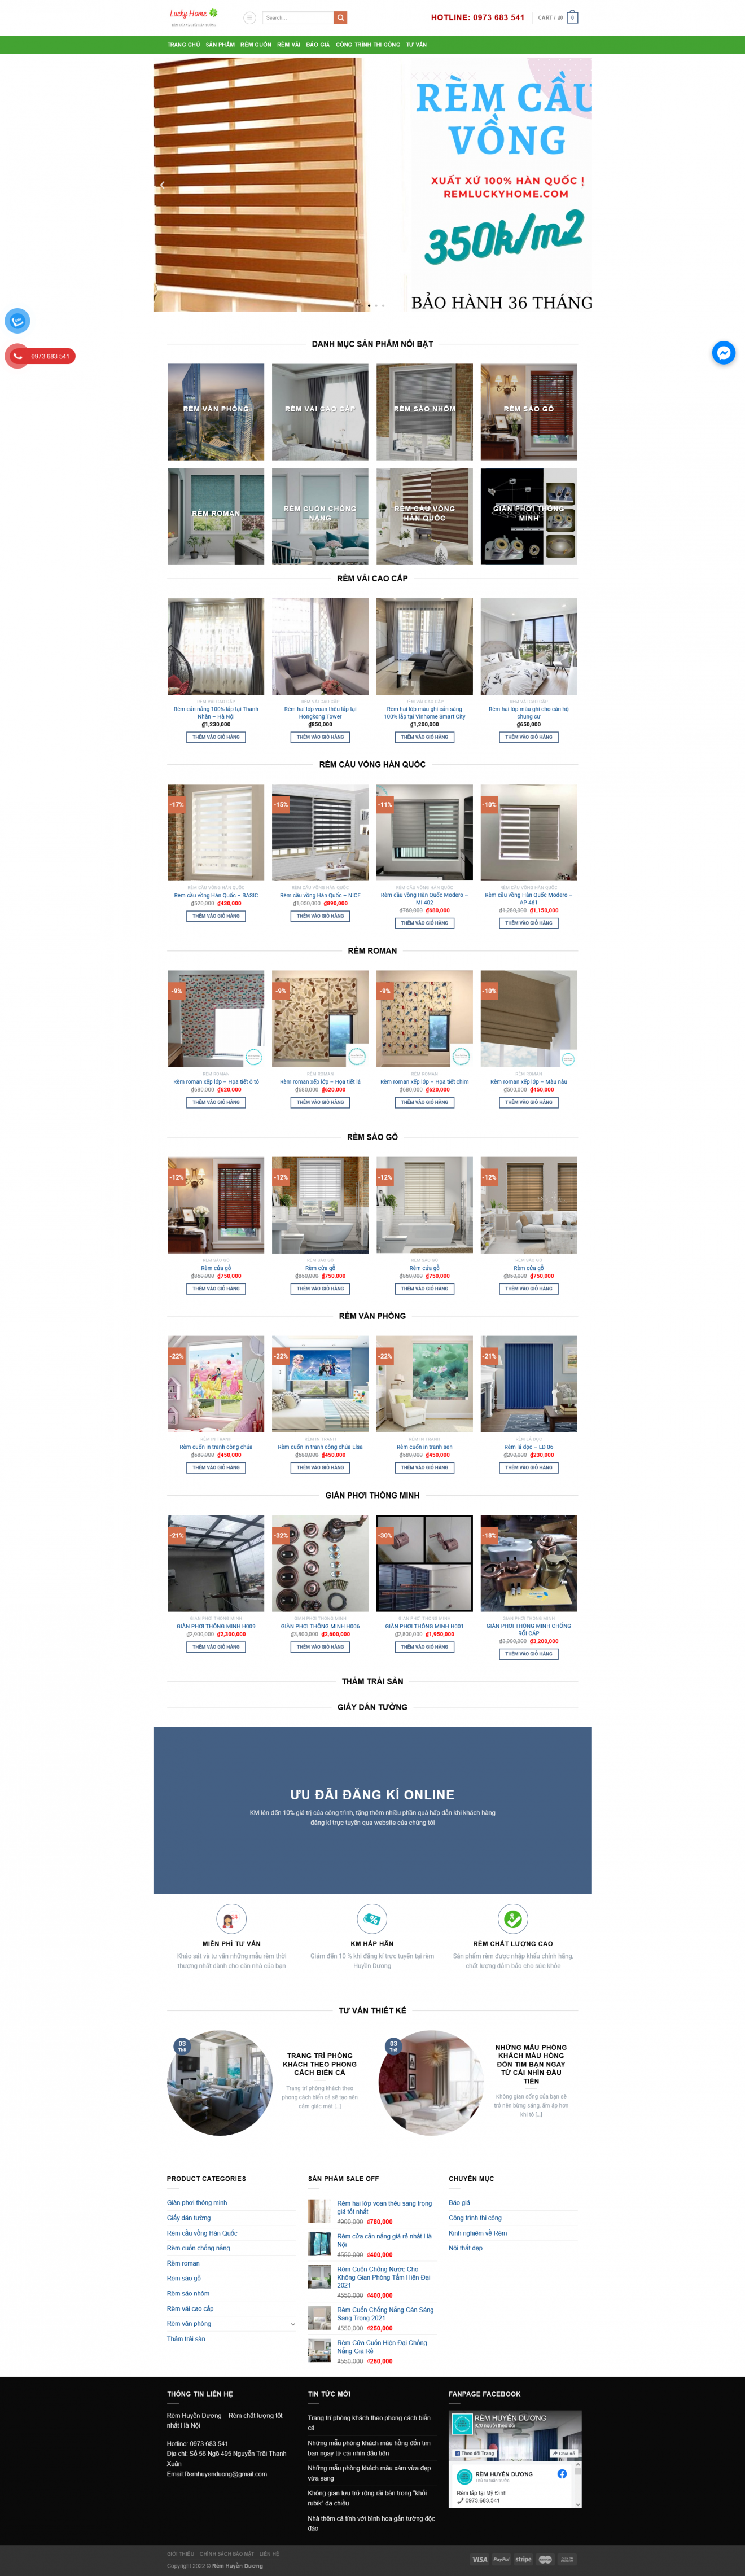 thiết kế giao diện web remluckyhome.com